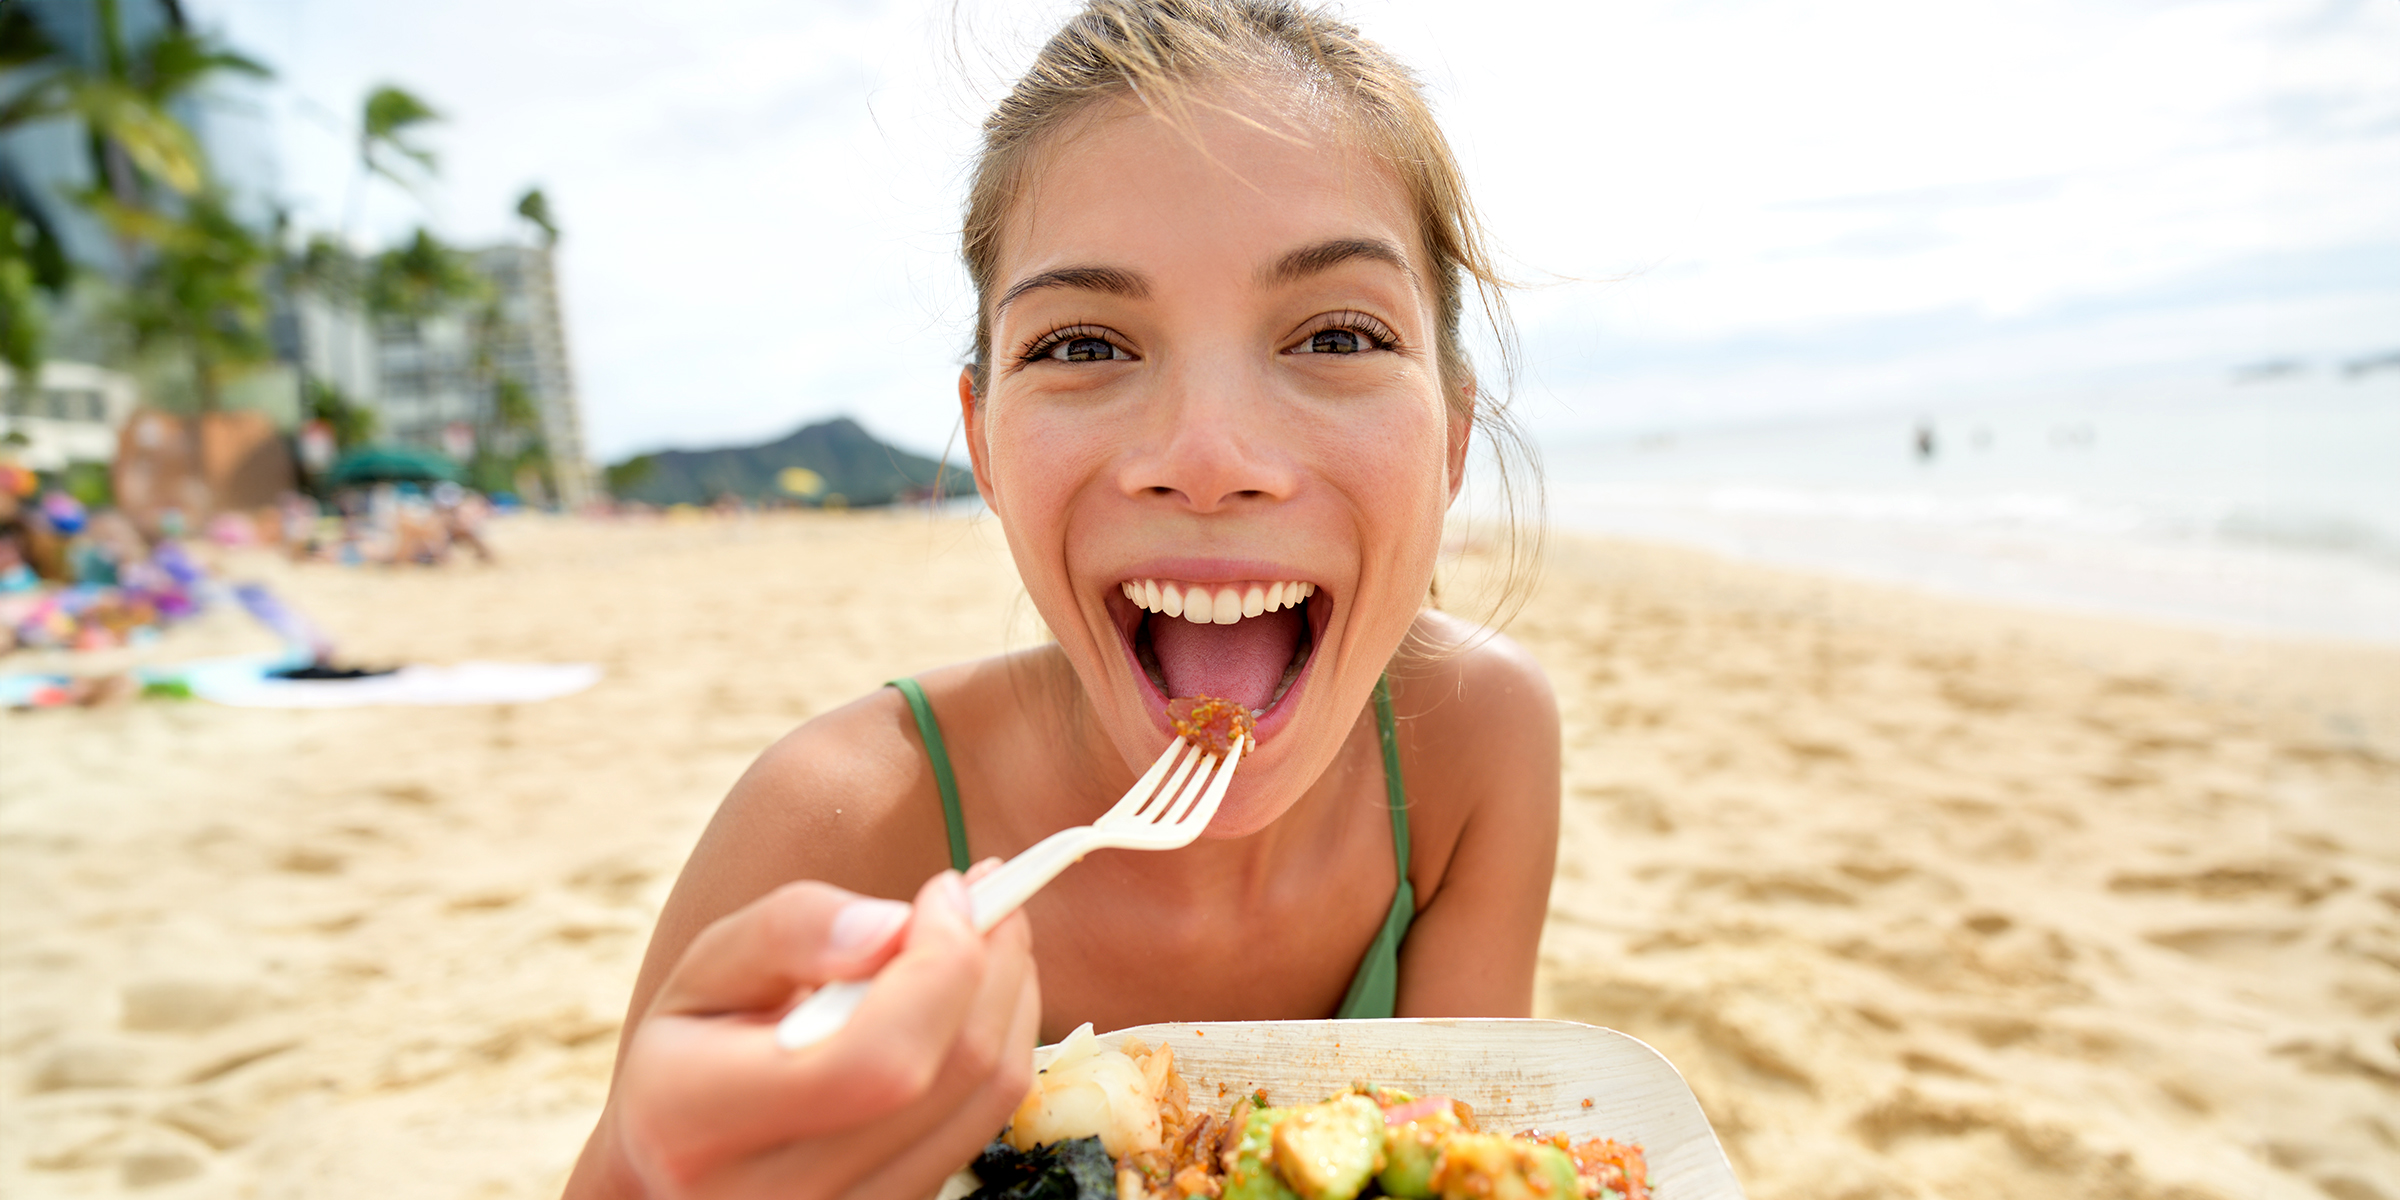 A woman enjoys food by the beach | Source: Shutterstock